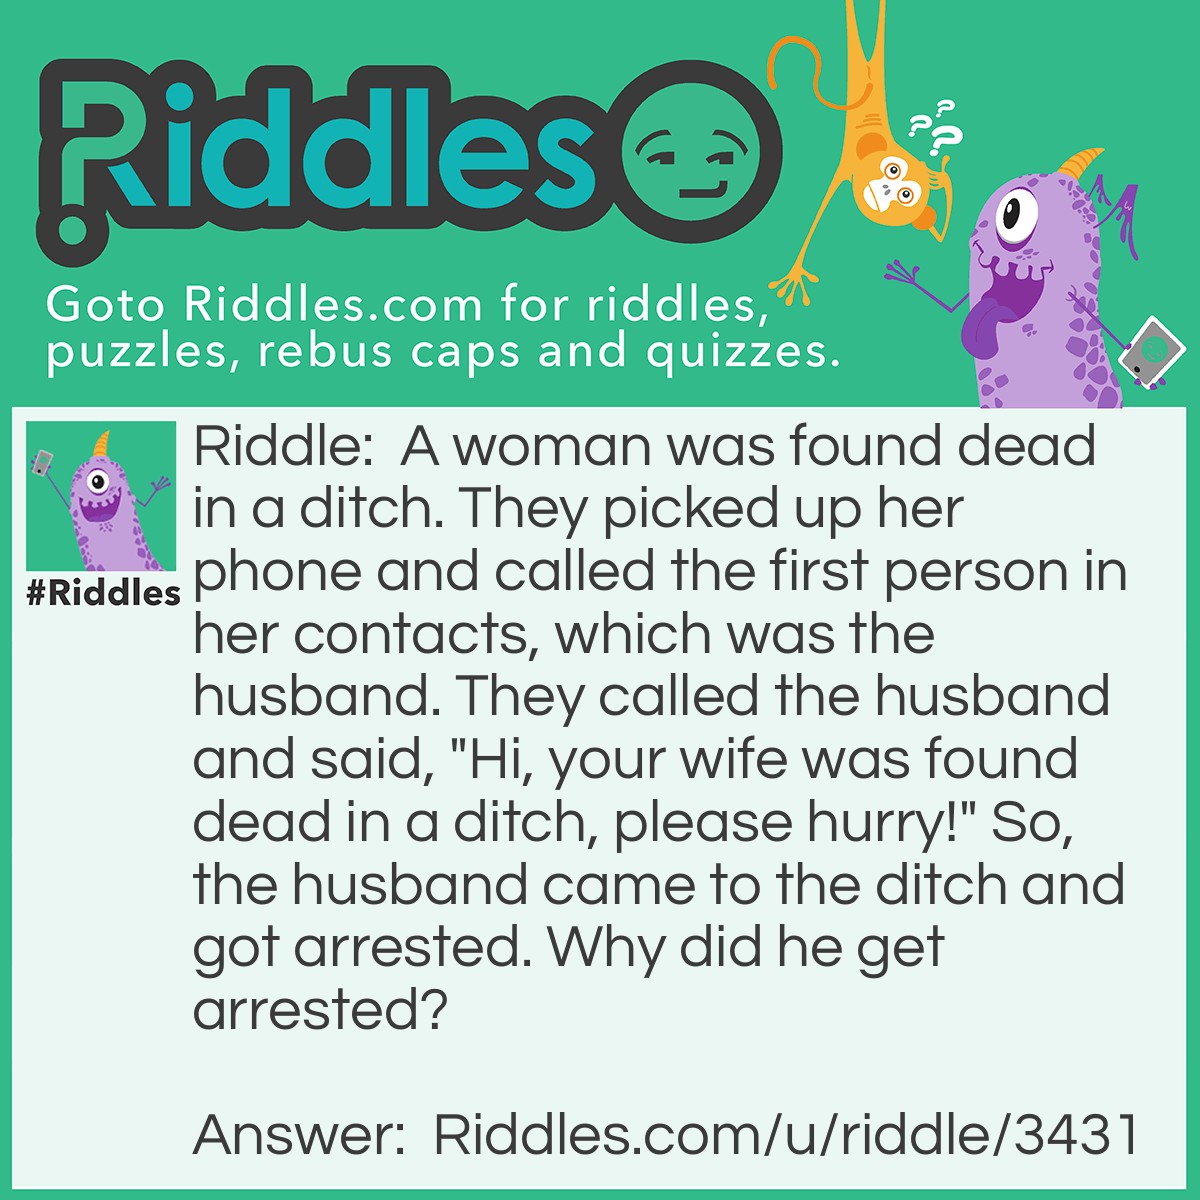 Riddle: A woman was found dead in a ditch. They picked up her phone and called the first person in her contacts, which was the husband. They called the husband and said, "Hi, your wife was found dead in a ditch, please hurry!" So, the husband came to the ditch and got arrested. Why did he get arrested? Answer: The husband killed her, because he knew where the ditch was.